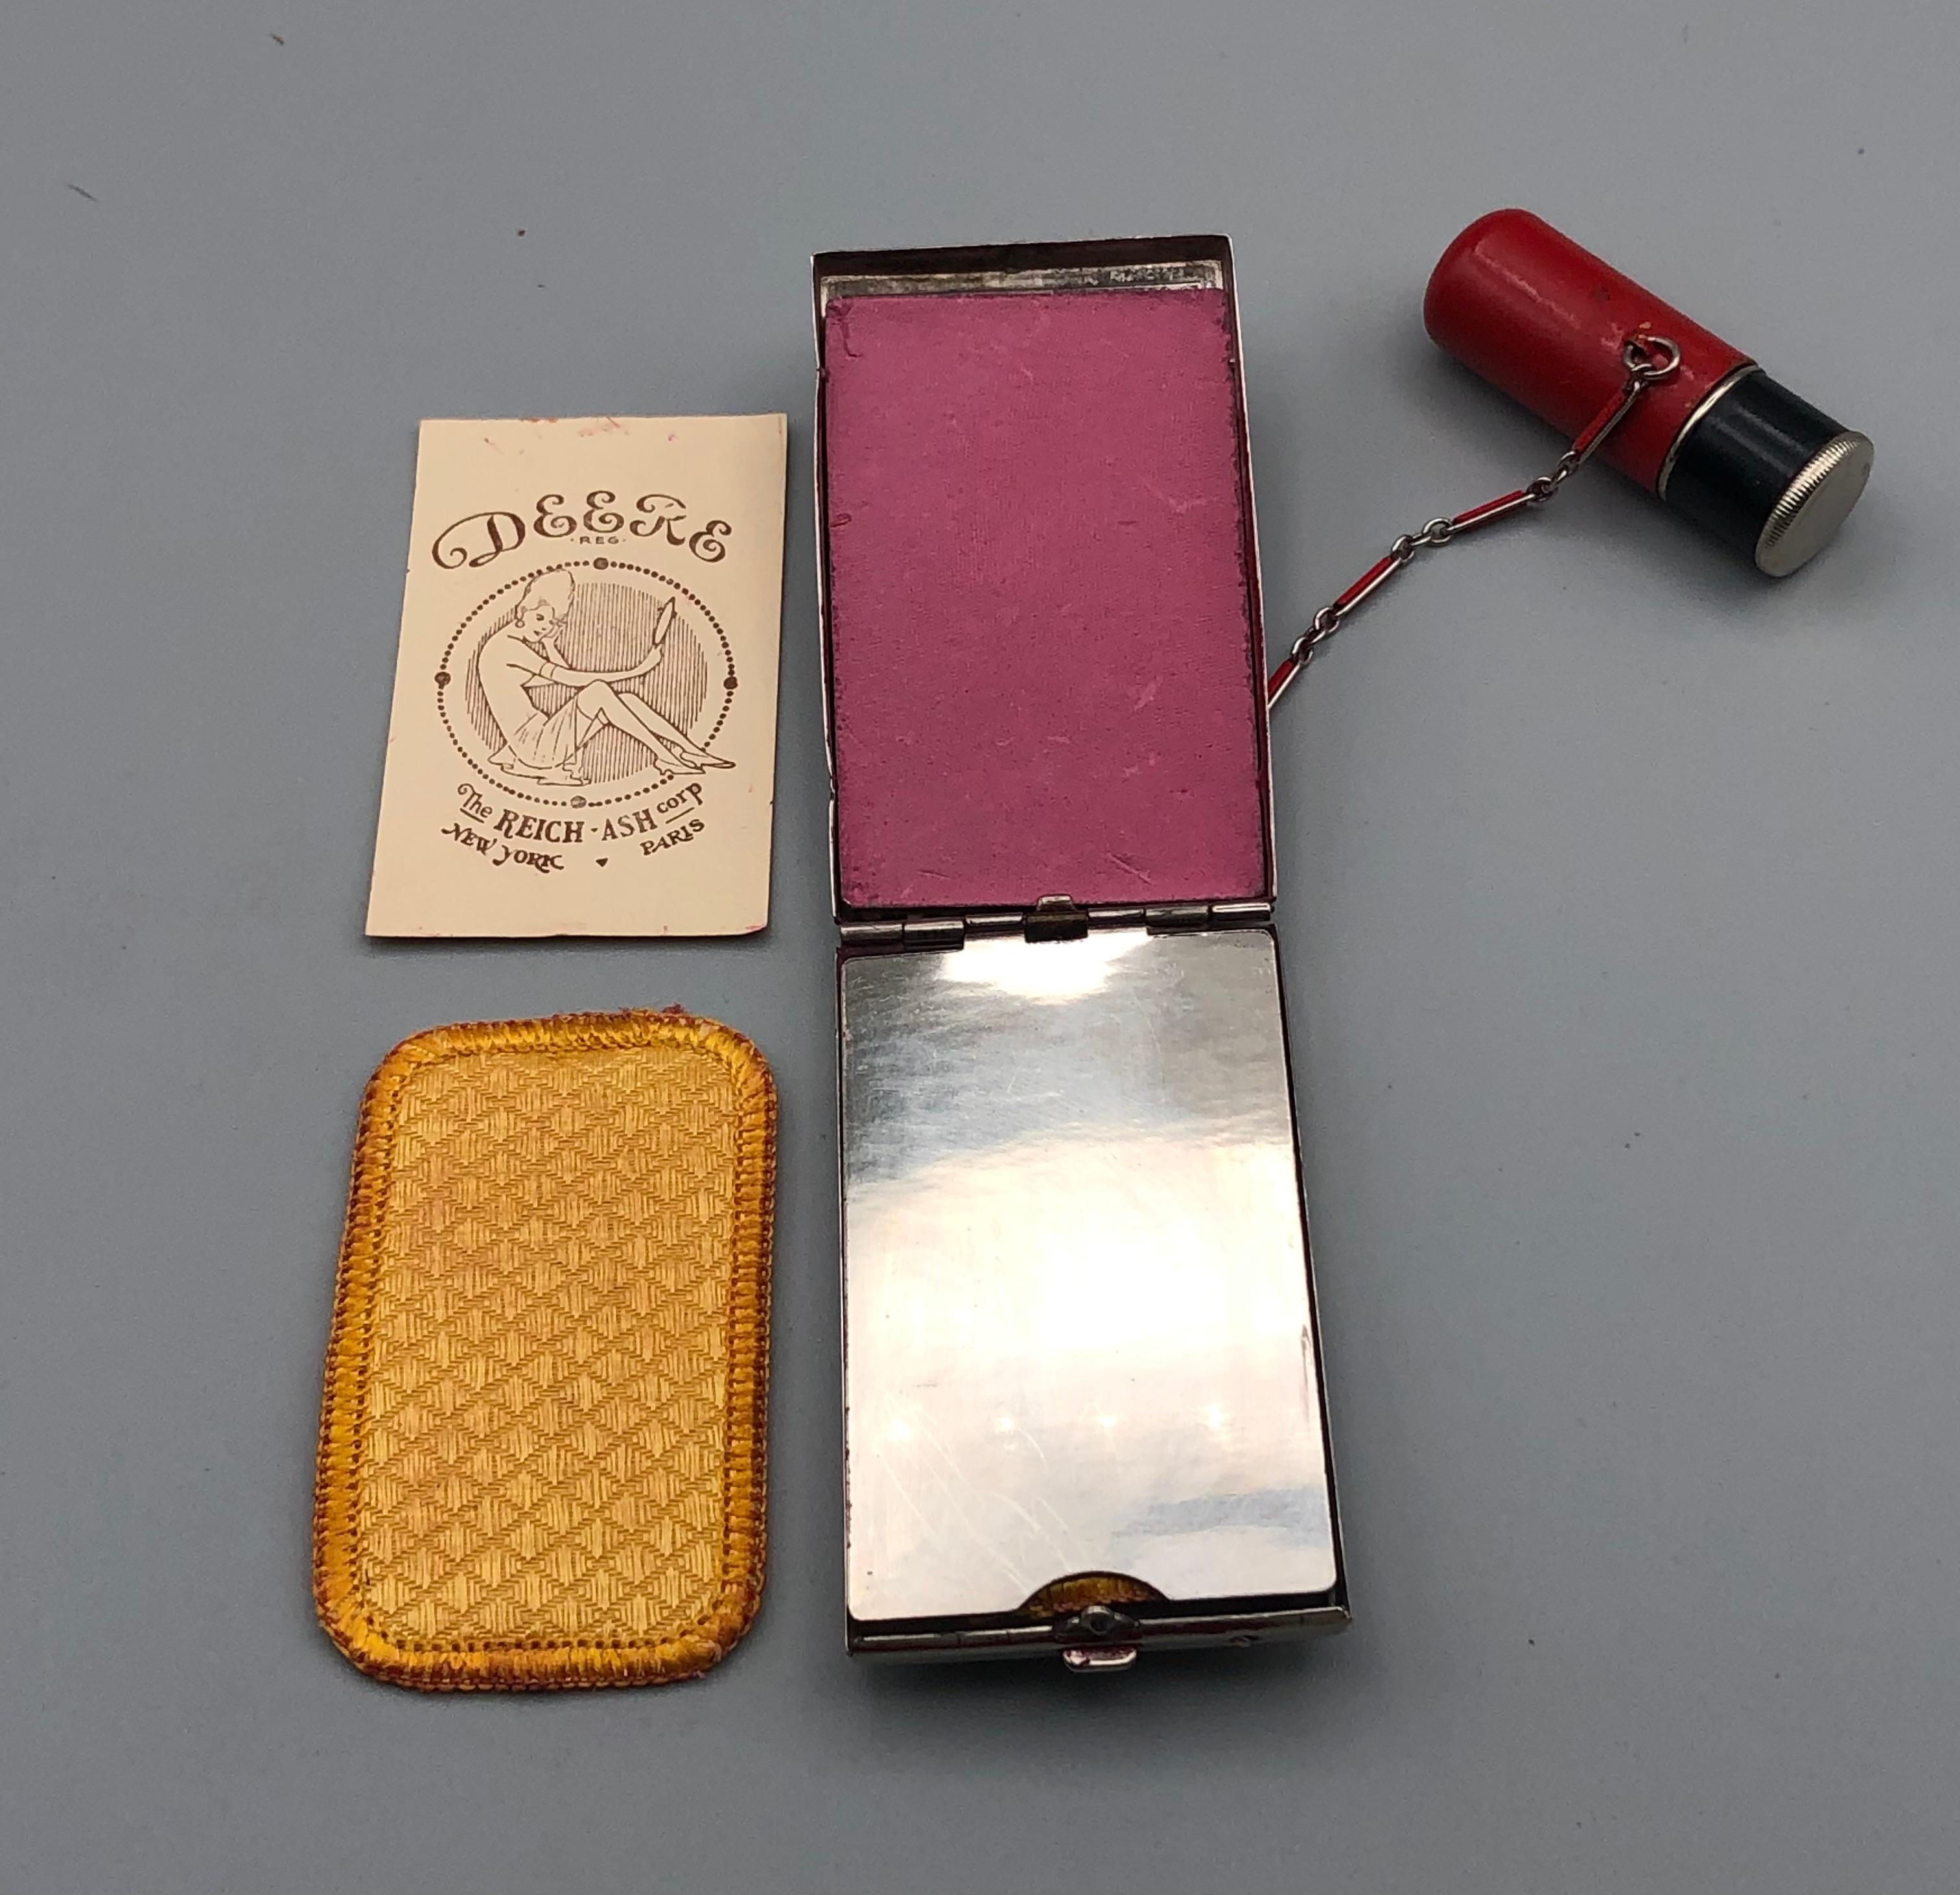 This beautiful compact has a stunning bright red and black enamel front, a classic Art Deco ladies combination compact in wonderful condition inside and out. At the base you will find a pretty machine pressed design in silver. A lipstick is attached